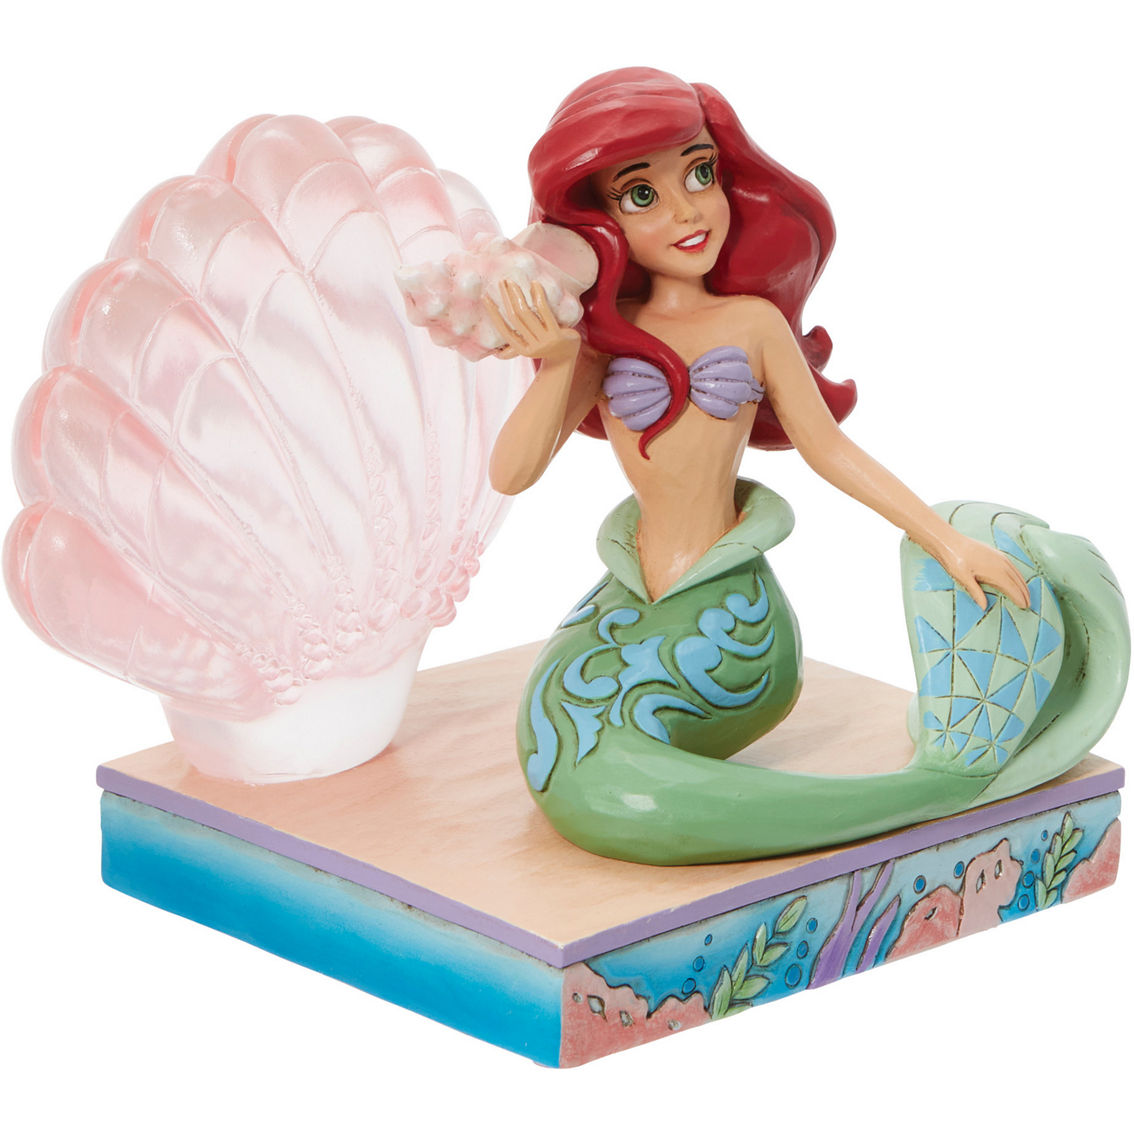 Jim Shore Disney Traditions Ariel Clear Resin Shell - Image 3 of 3